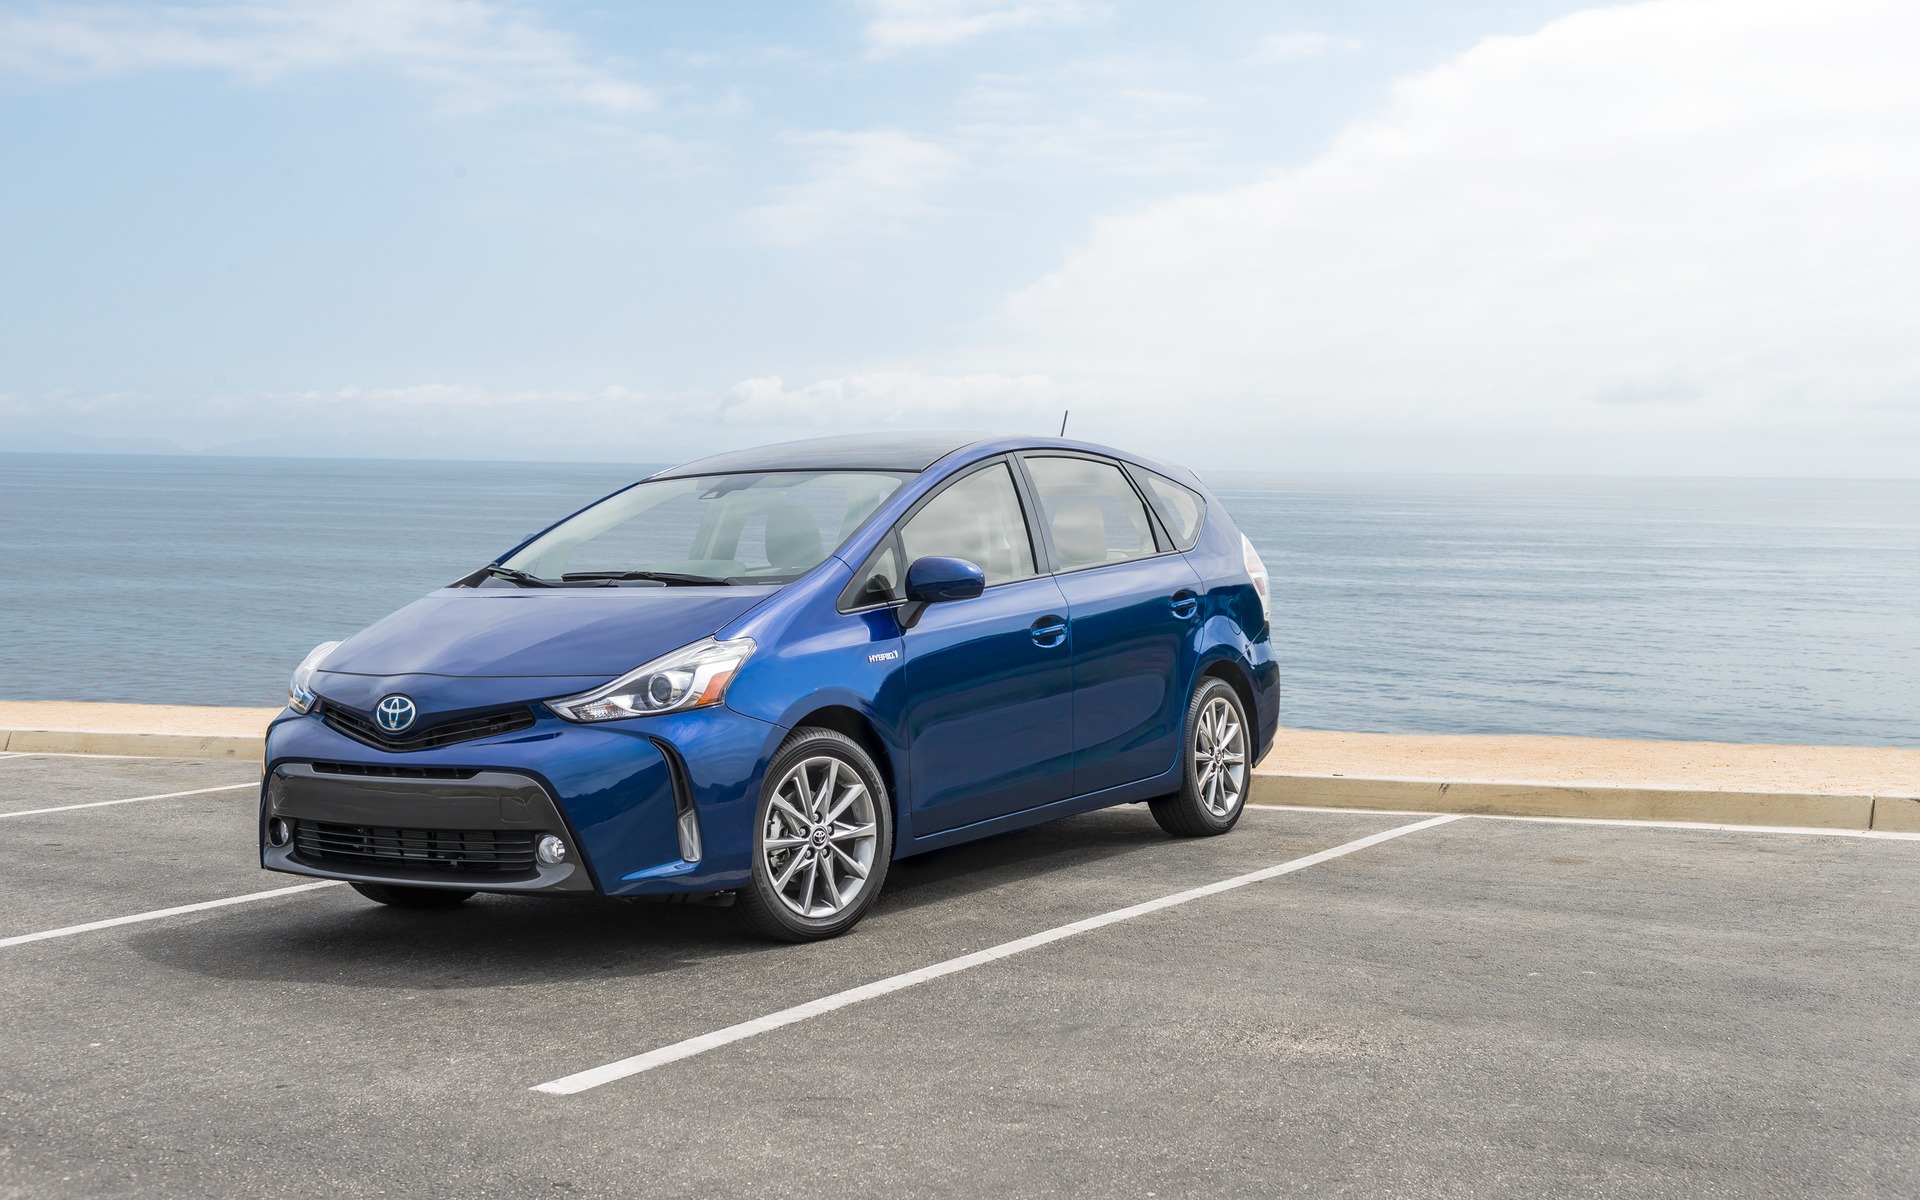 2018 Toyota Prius V Specifications The Car Guide